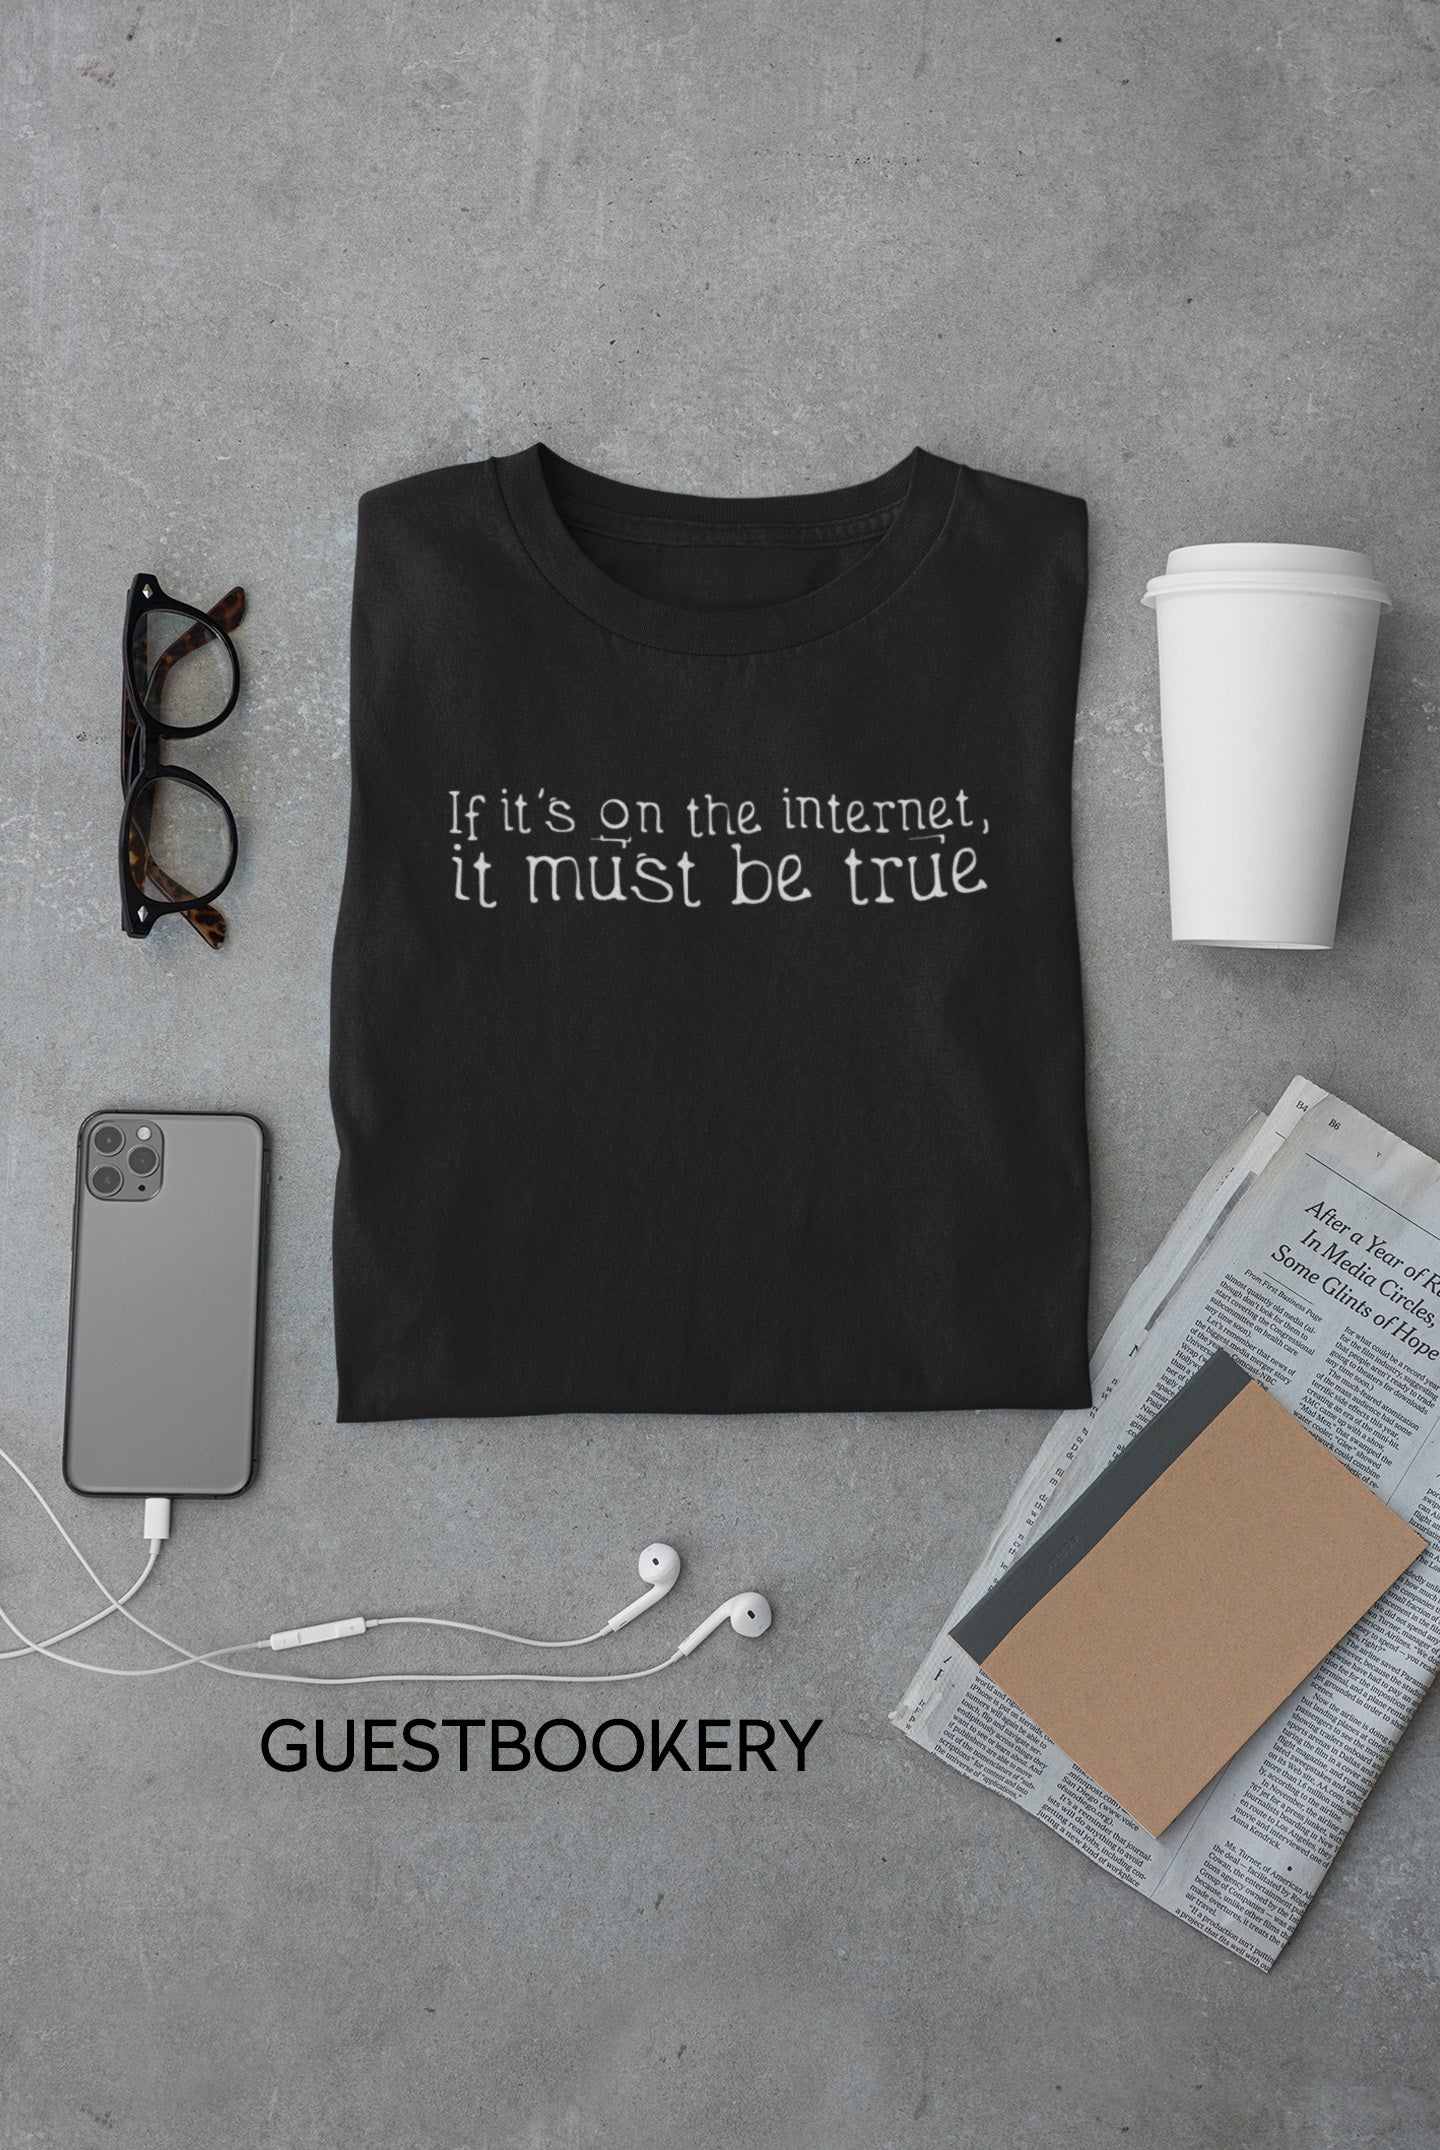 If it's on the internet, it must be true t-shirt